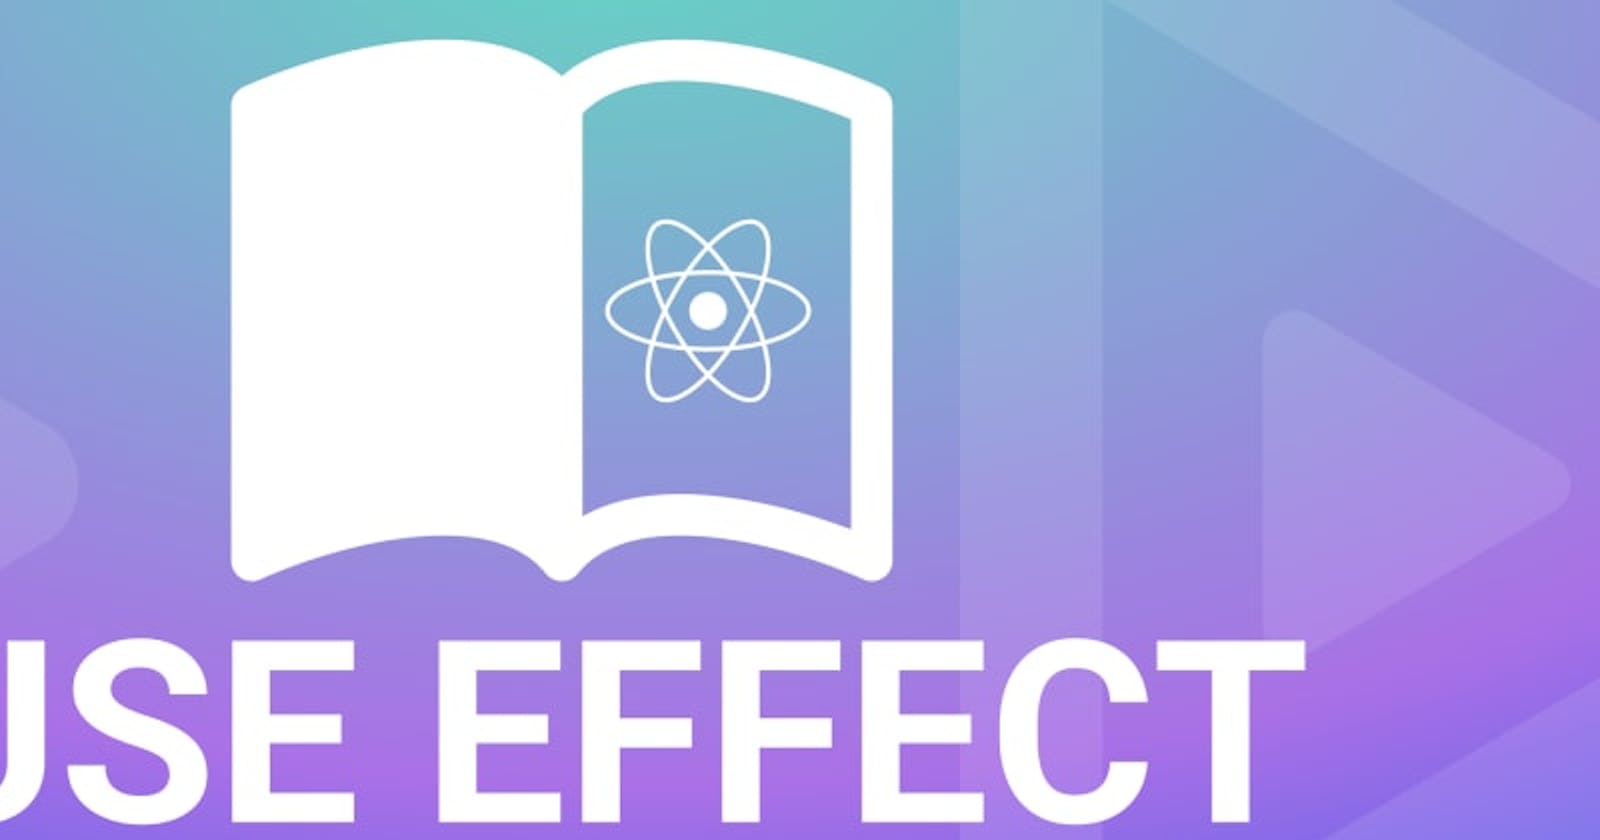 A Guide to React's useEffect Hook